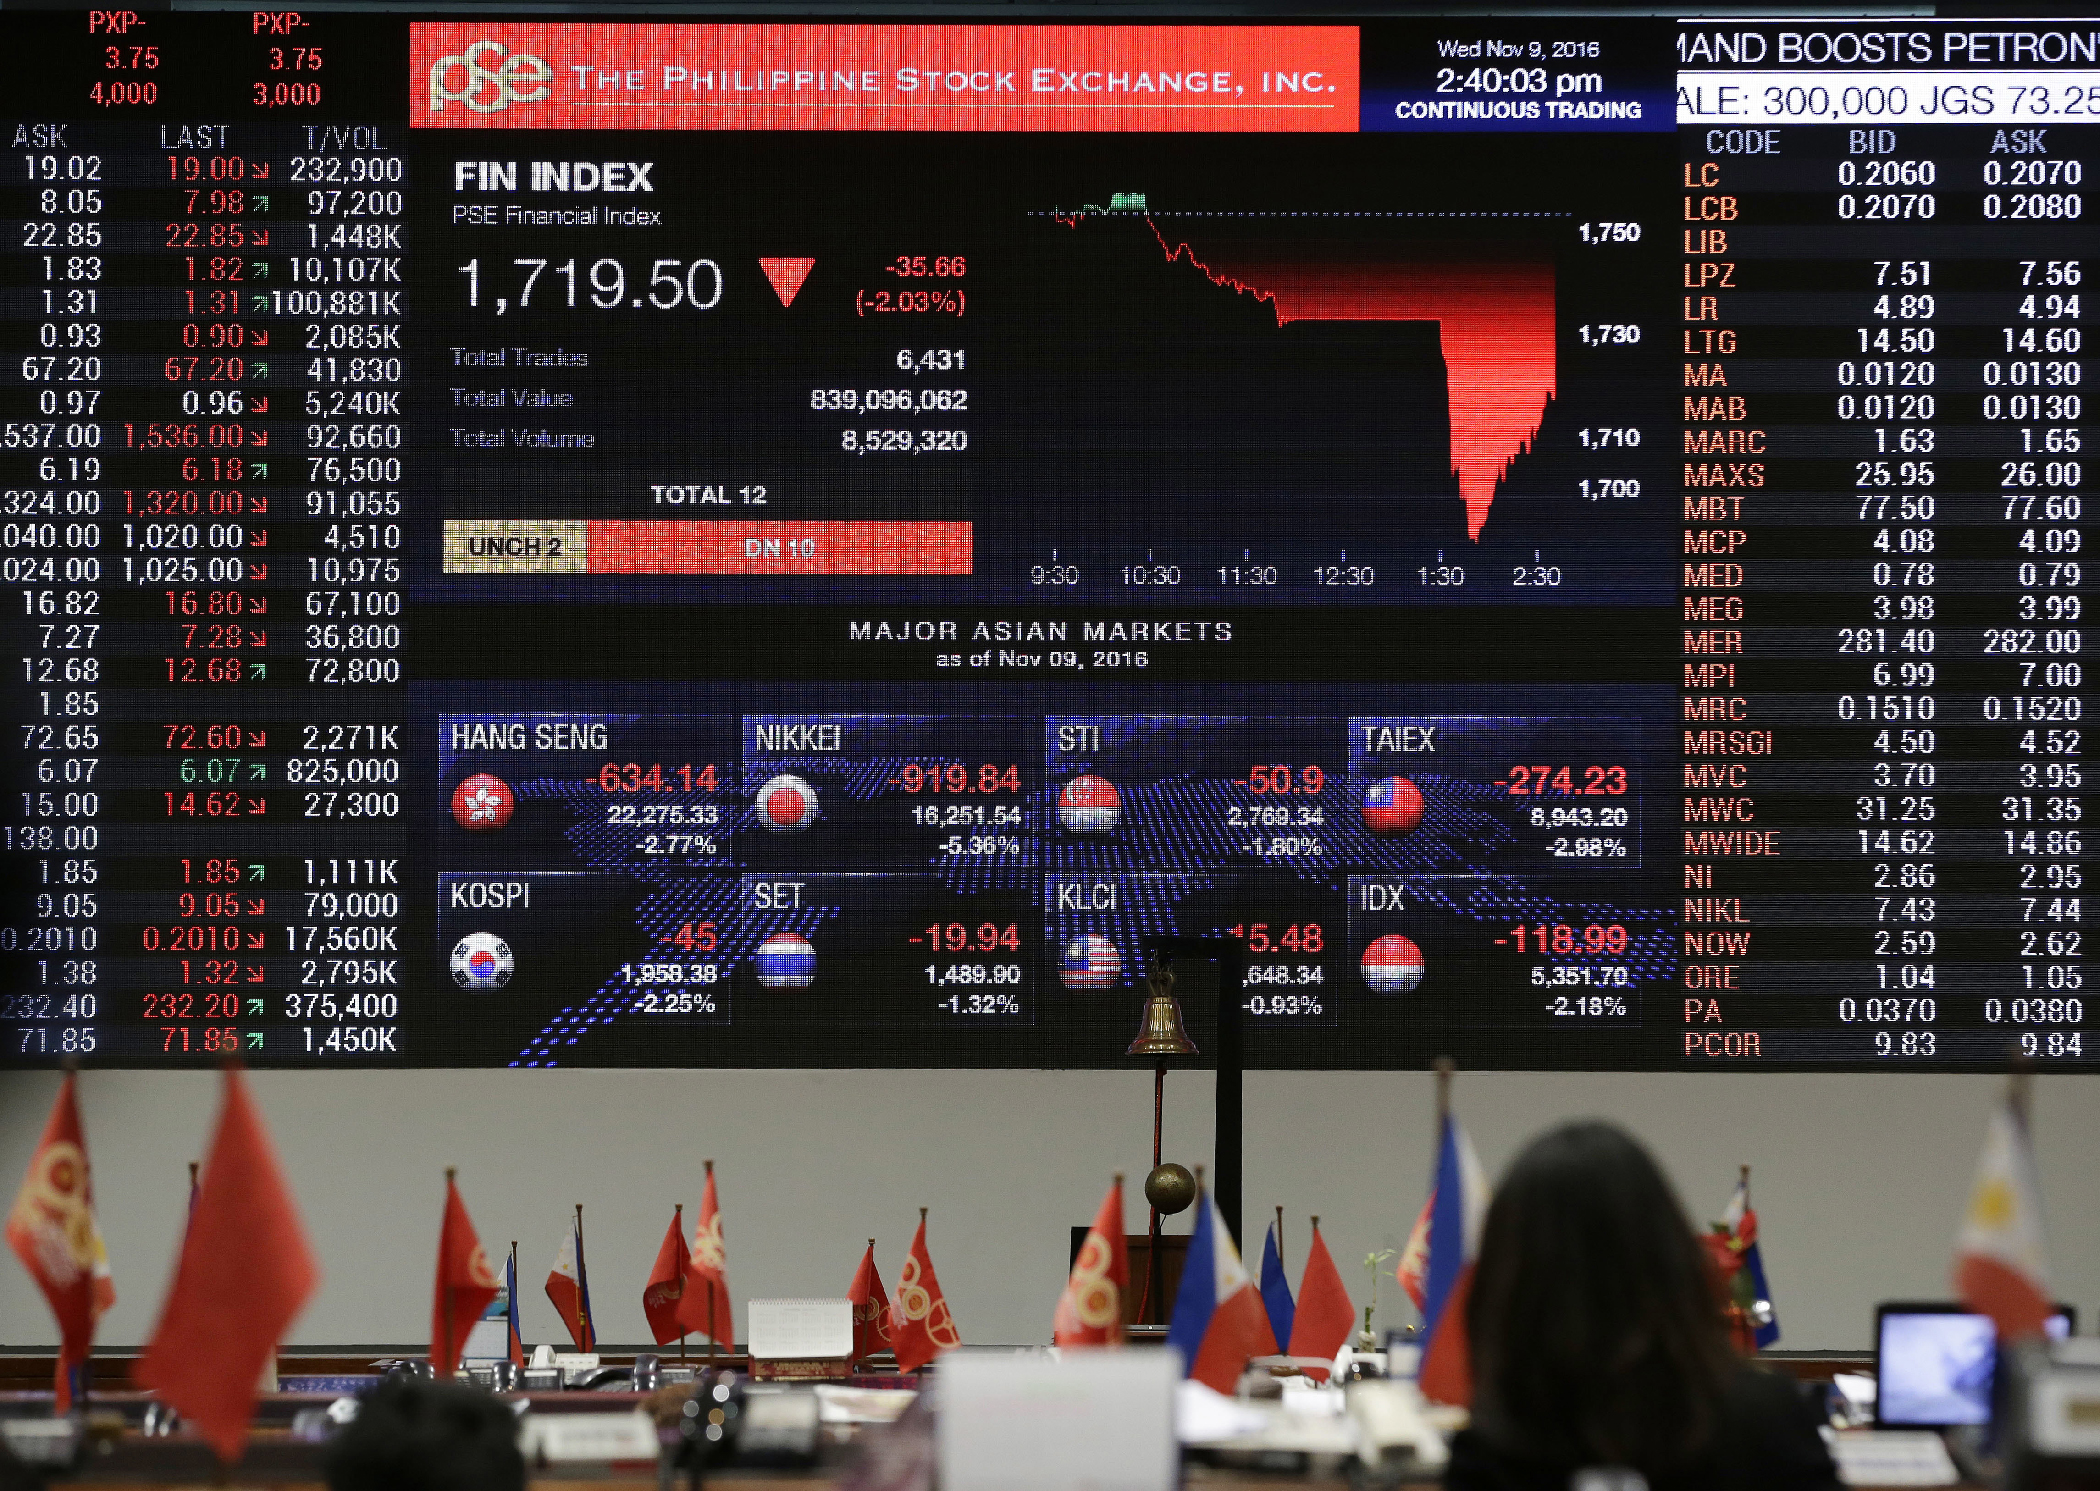 The Philippine Stock exchange fell to a <a href="http://www.rappler.com/business/151837-philippines-pse-stocks-donald-trump-win">7-month low</a> on Trump’s win. In this photo, a Filipino trader looks at the electronic board showing a downward trend during trading at the Philippine Stock Exchange at the financial district of Makati, south of Manila, Philippines, Wednesday, Nov. 9, 2016.